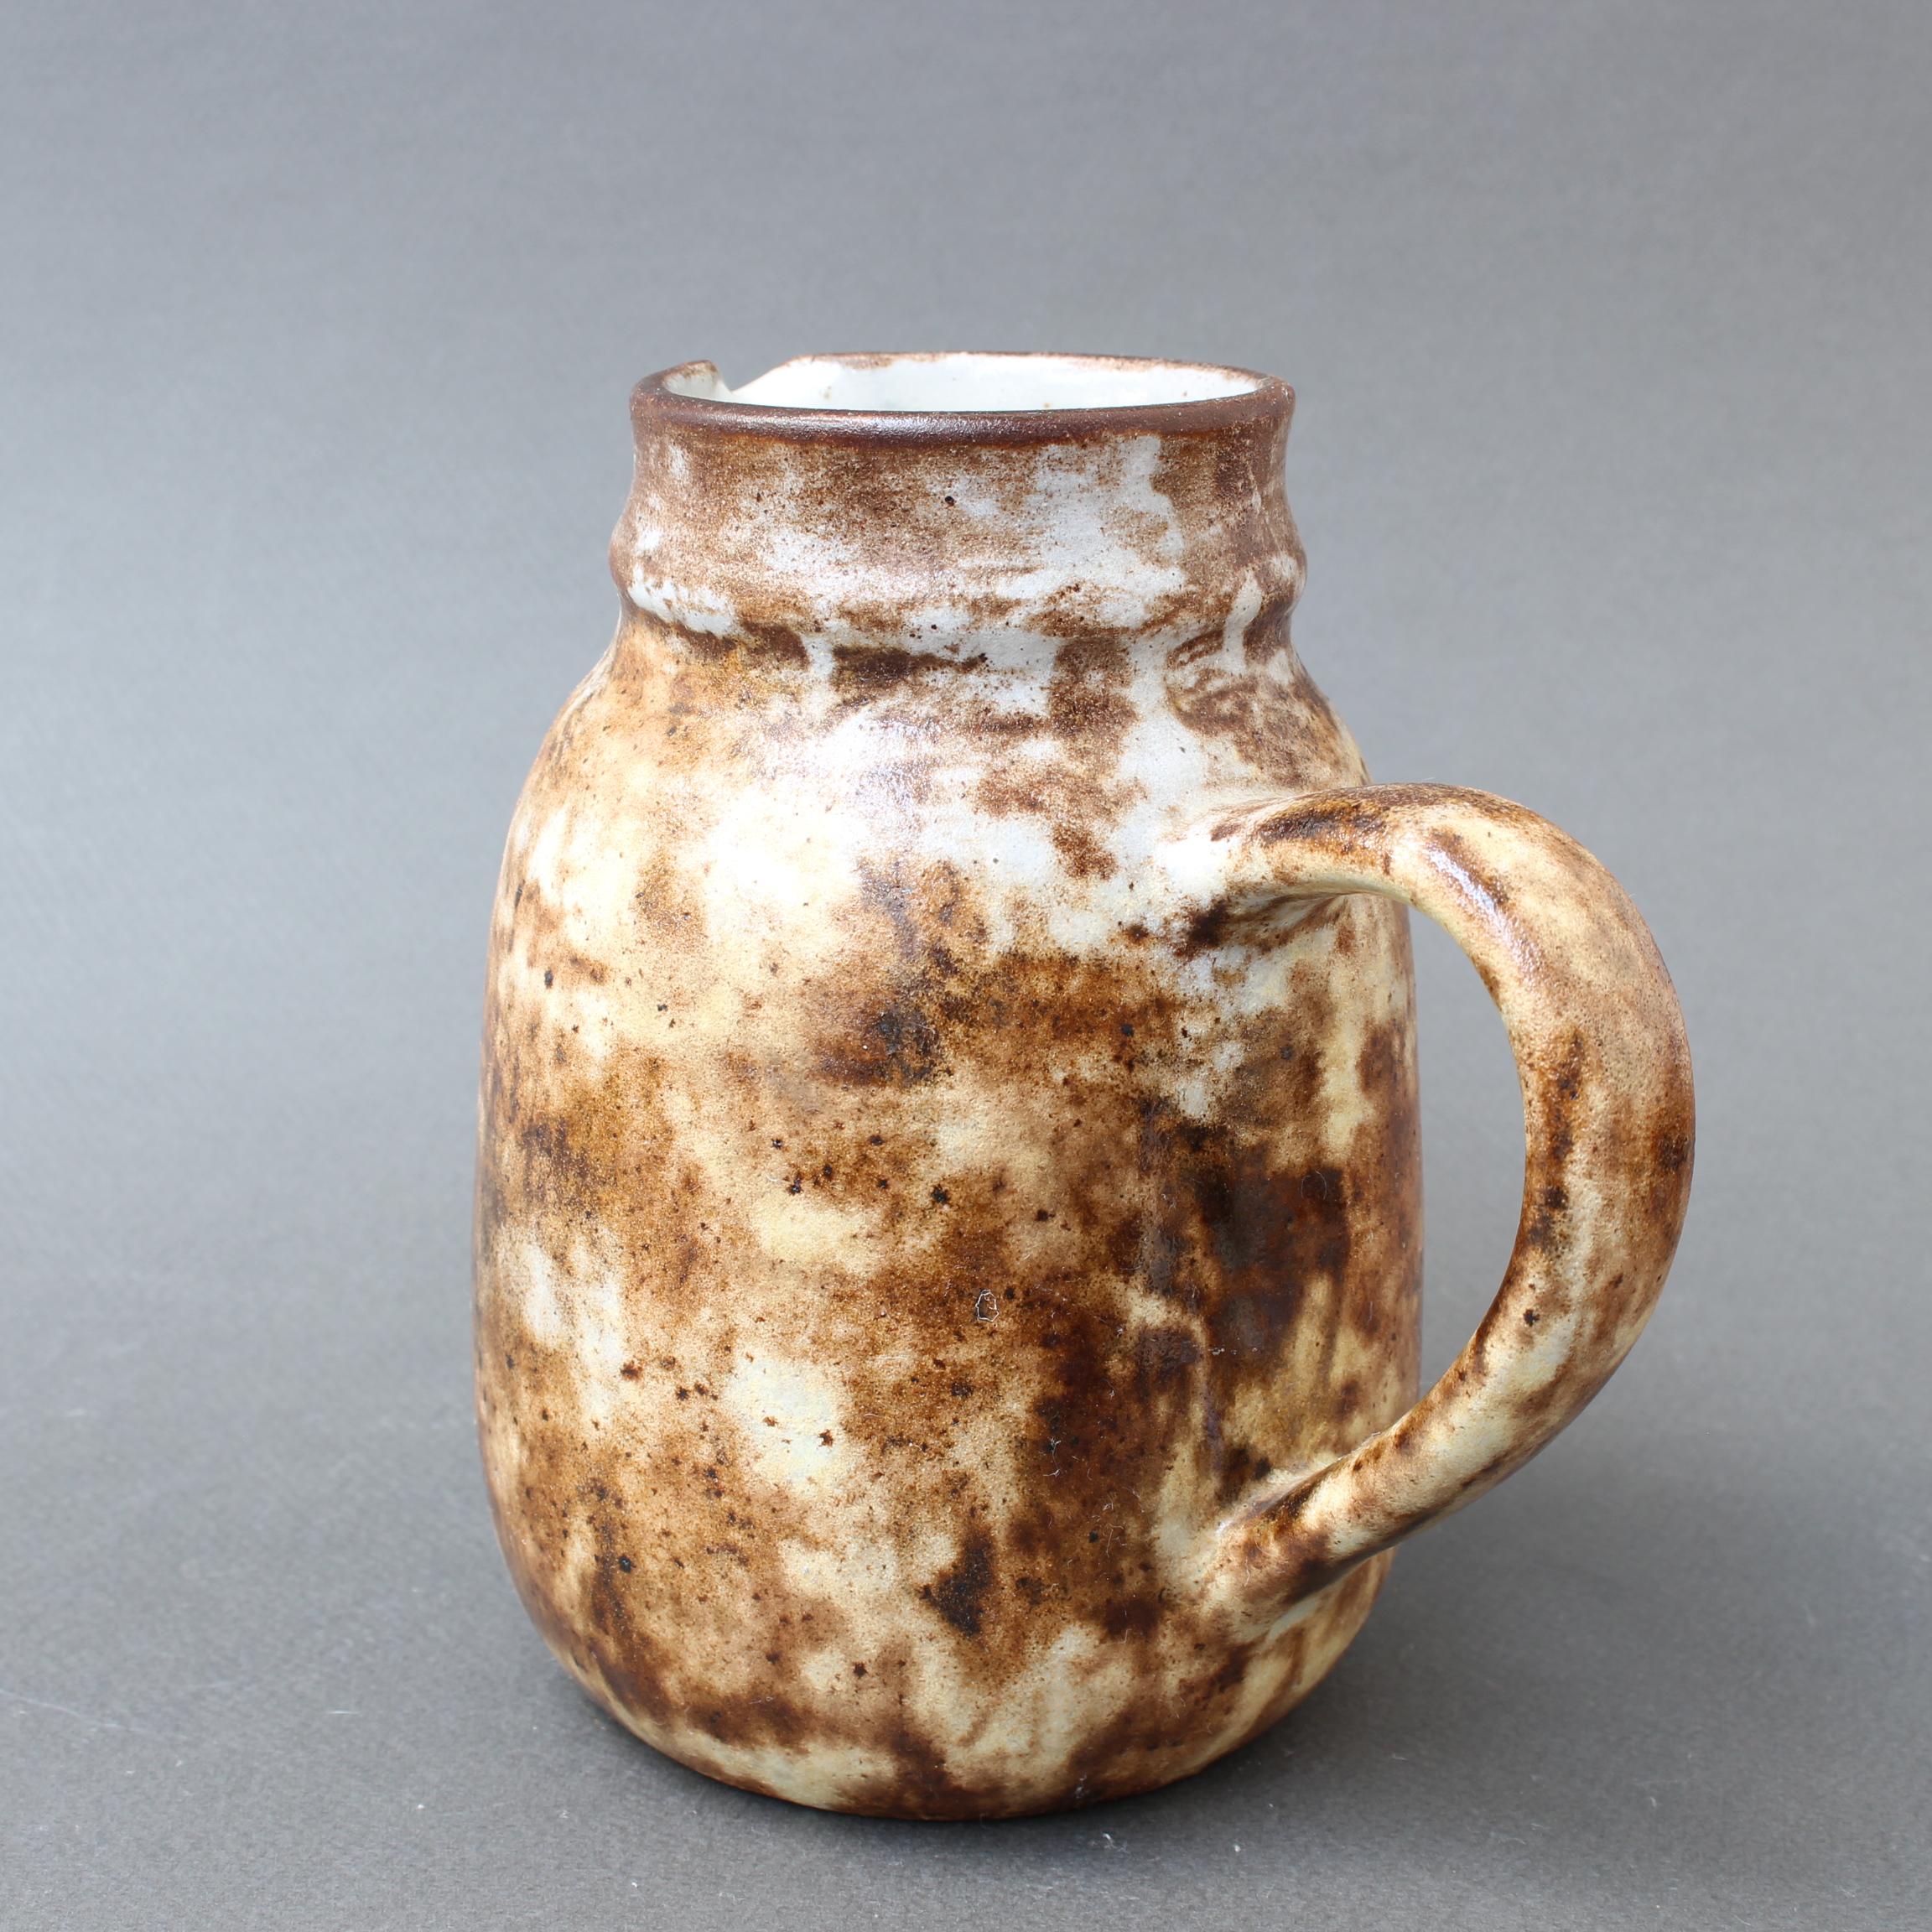 Midcentury ceramic jug / vase by Alexandre Kostanda (circa 1960s). In his trademark natural clay and rustic style, Kostanda created beautifully original vessels, such as vases, pitchers and pots which were both utilitarian and stunning works of art.